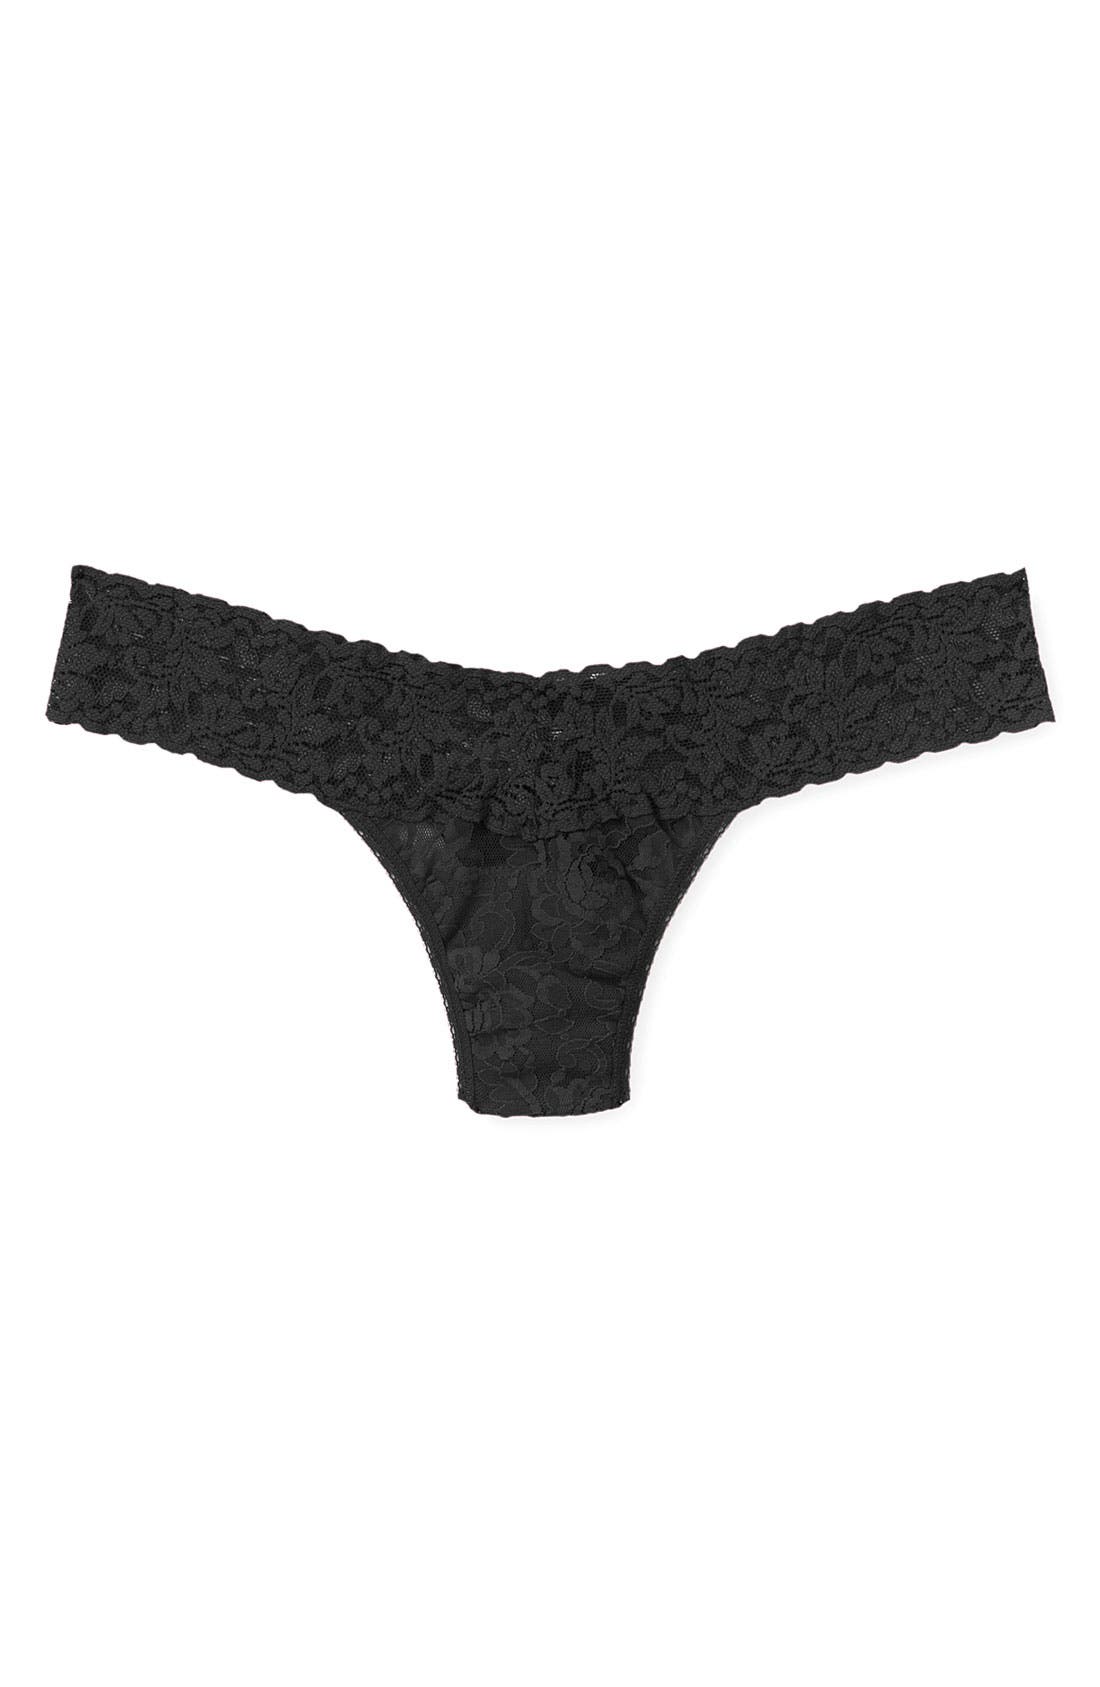 Hanky Panky Womens Signature Lace Low Rise Thong